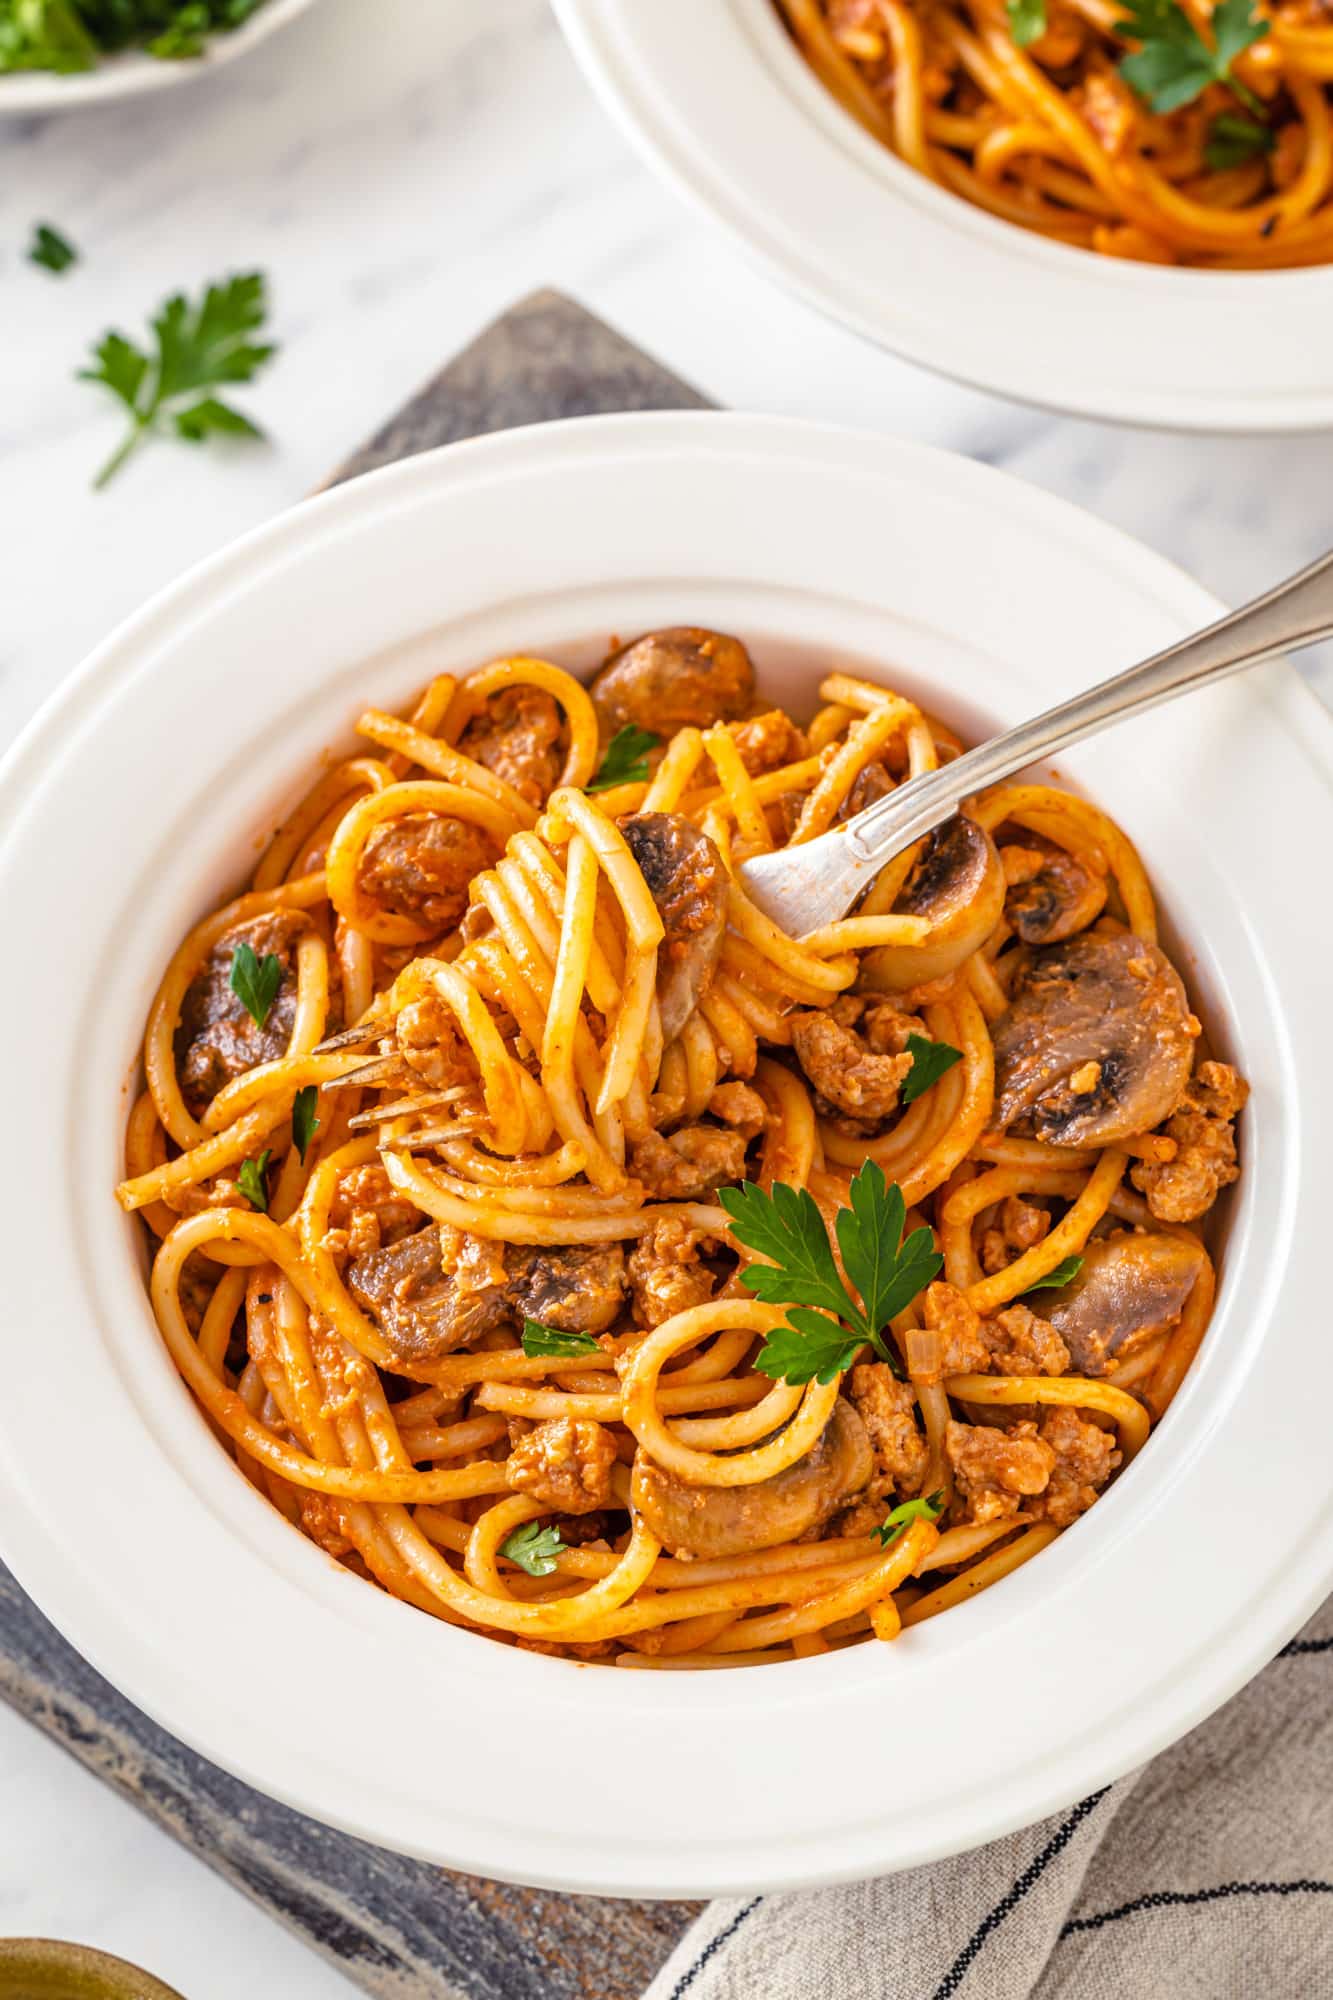 spaghetti with beef and mushrooms in a white bowl with a fork.